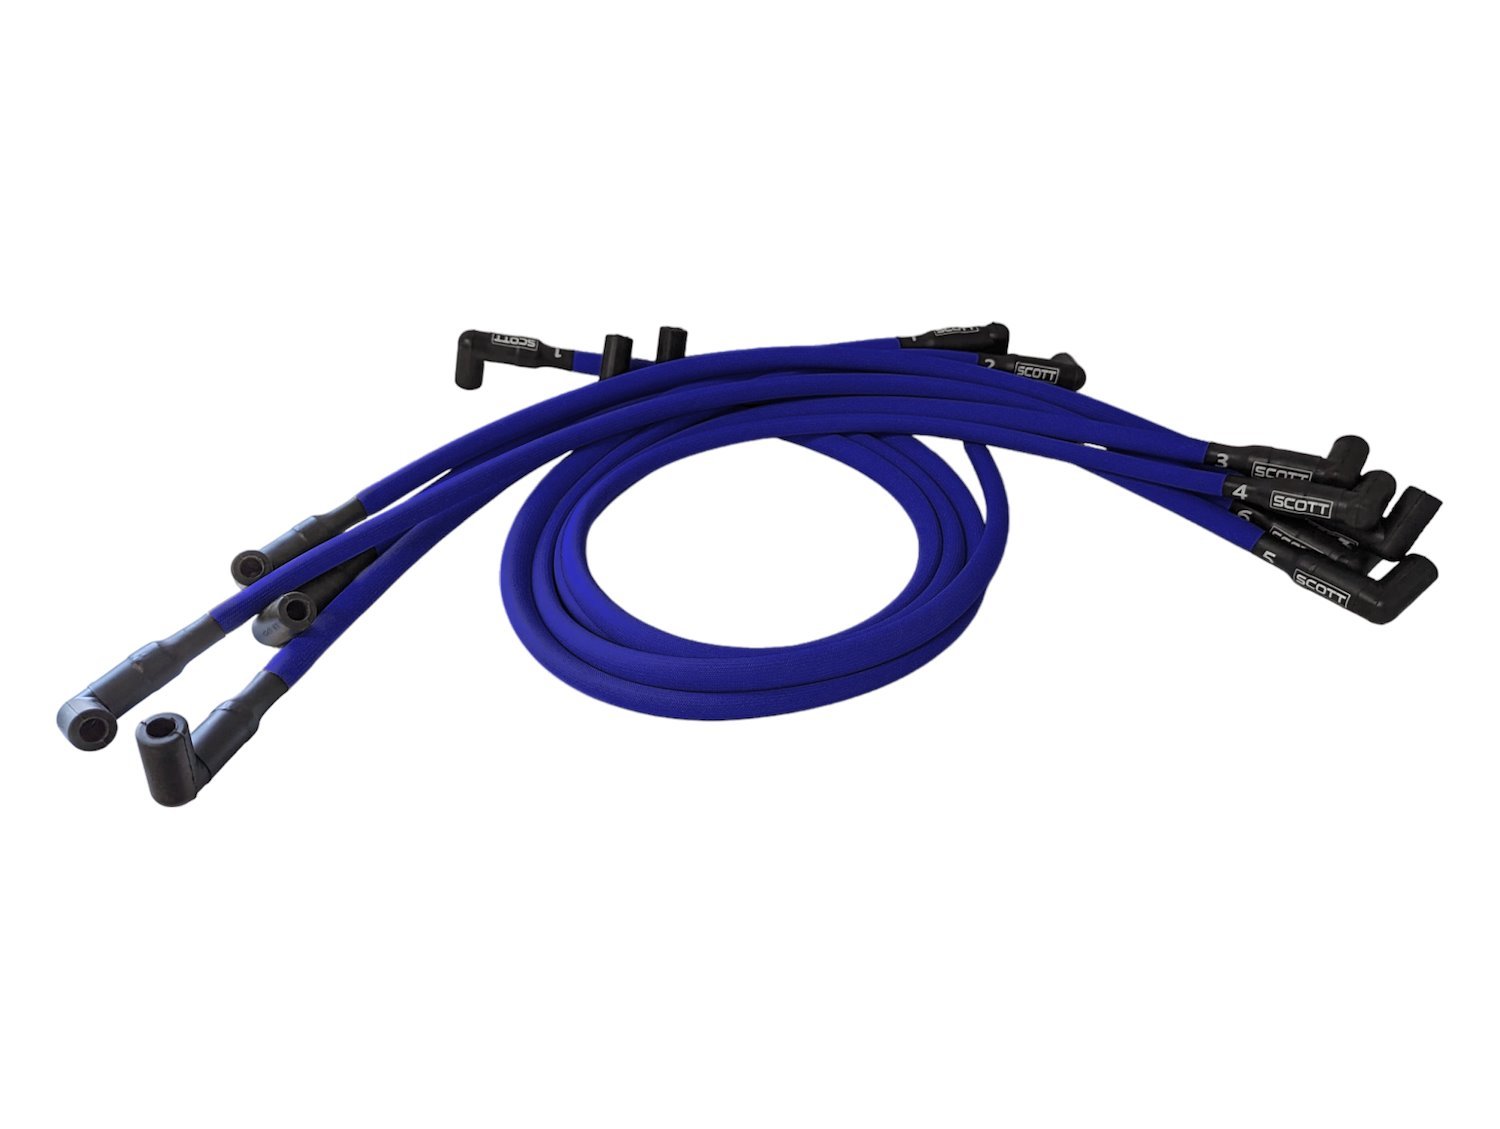 SPW-PS-430-3 High-Performance Fiberglass-Oversleeved Spark Plug Wire Set for Big Block Ford, Under Header [Blue]